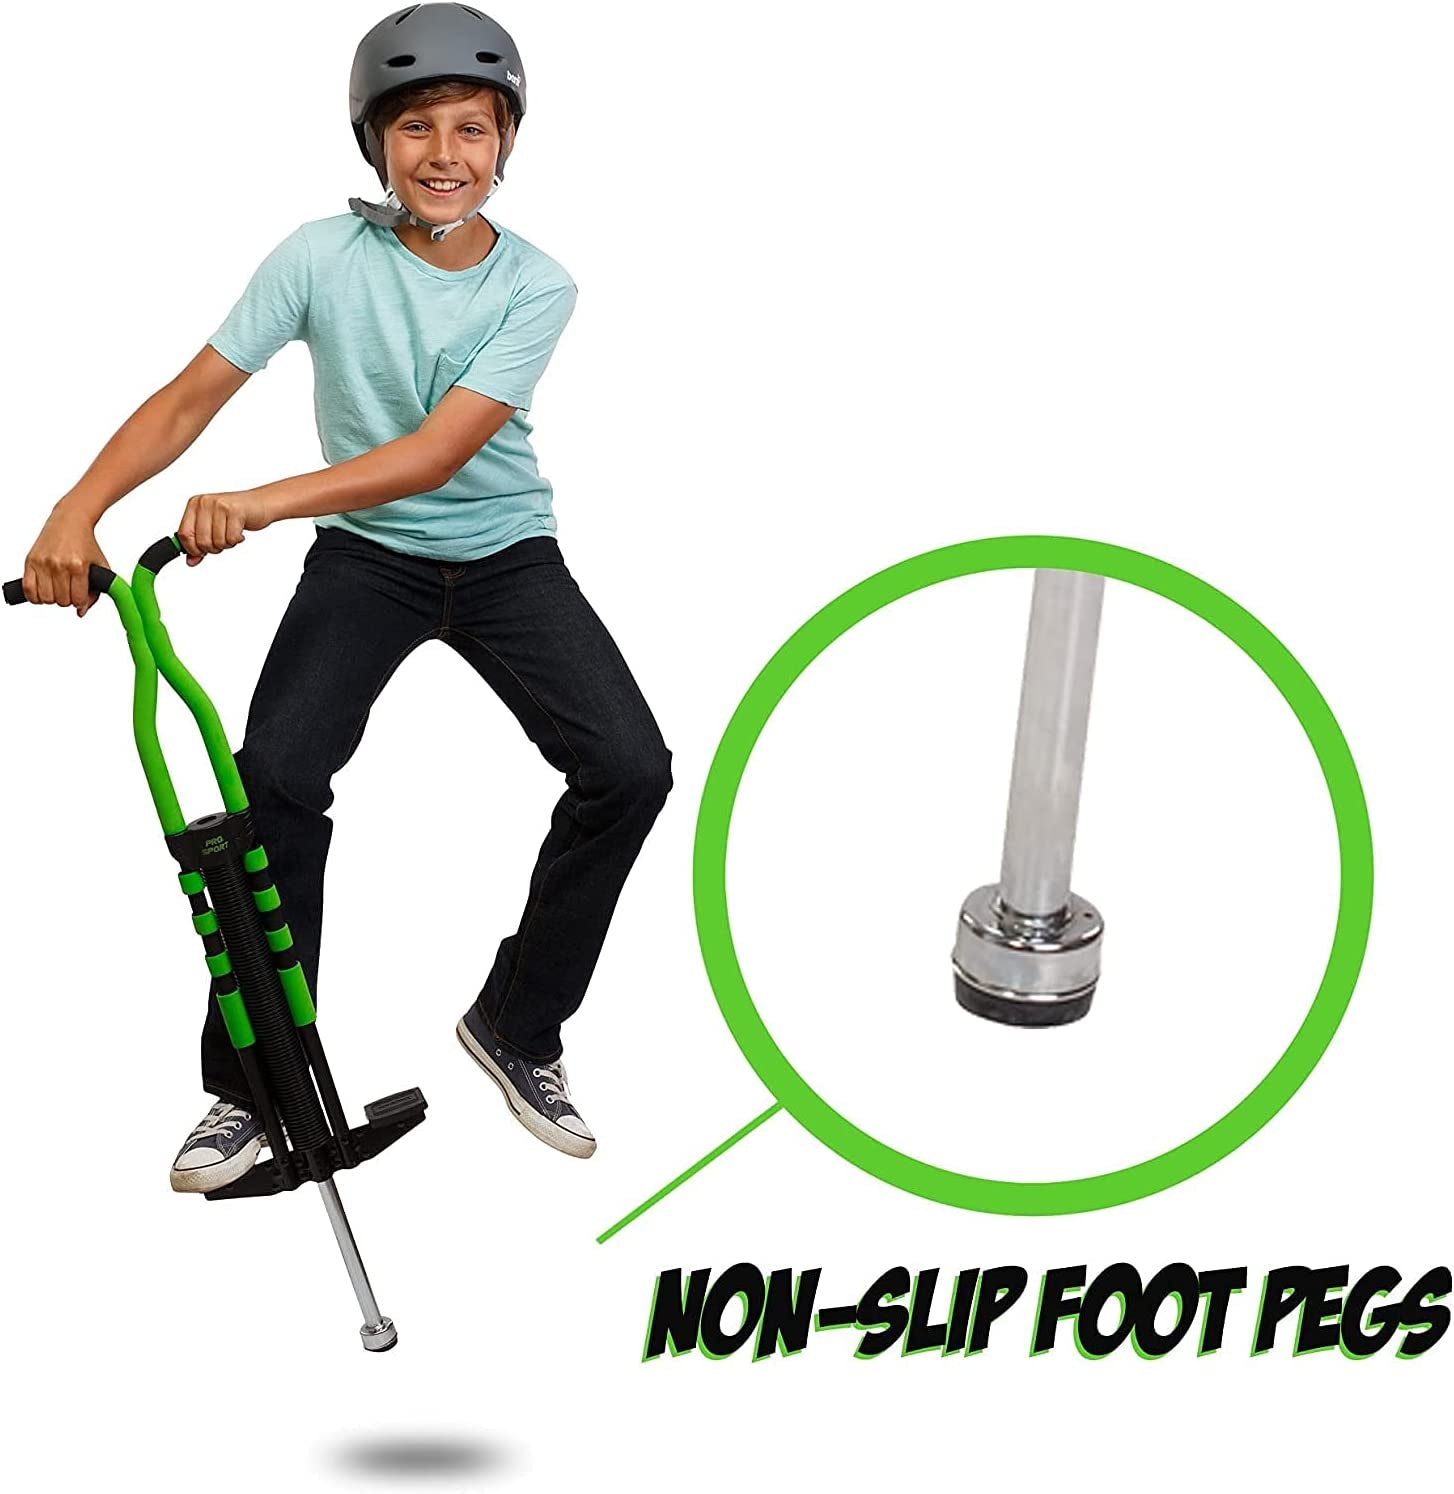 "Pro Sport Edition Pogo Stick - Premium Quality, Easy Grip Design - Suitable for Ages 9 and Up, 80 to 160 Lbs - Ensures Hours of Wholesome Entertainment"